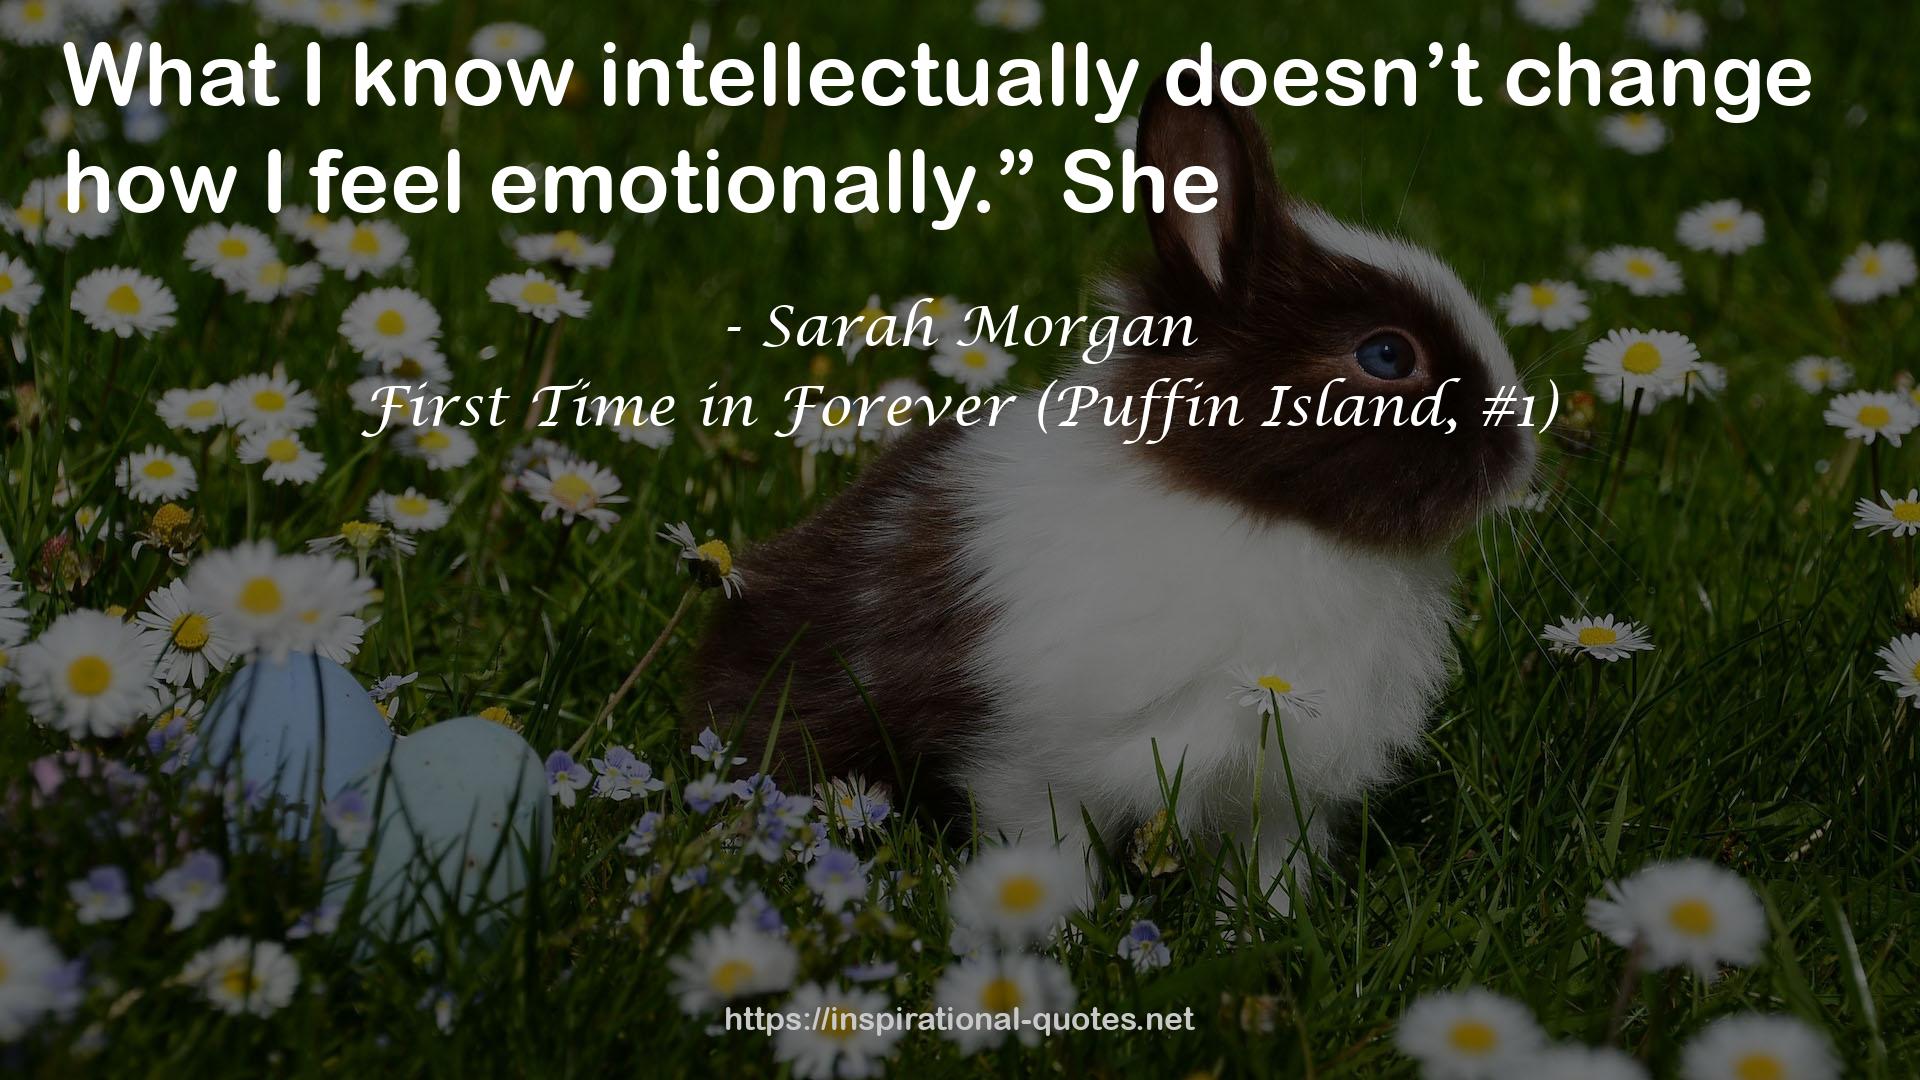 First Time in Forever (Puffin Island, #1) QUOTES